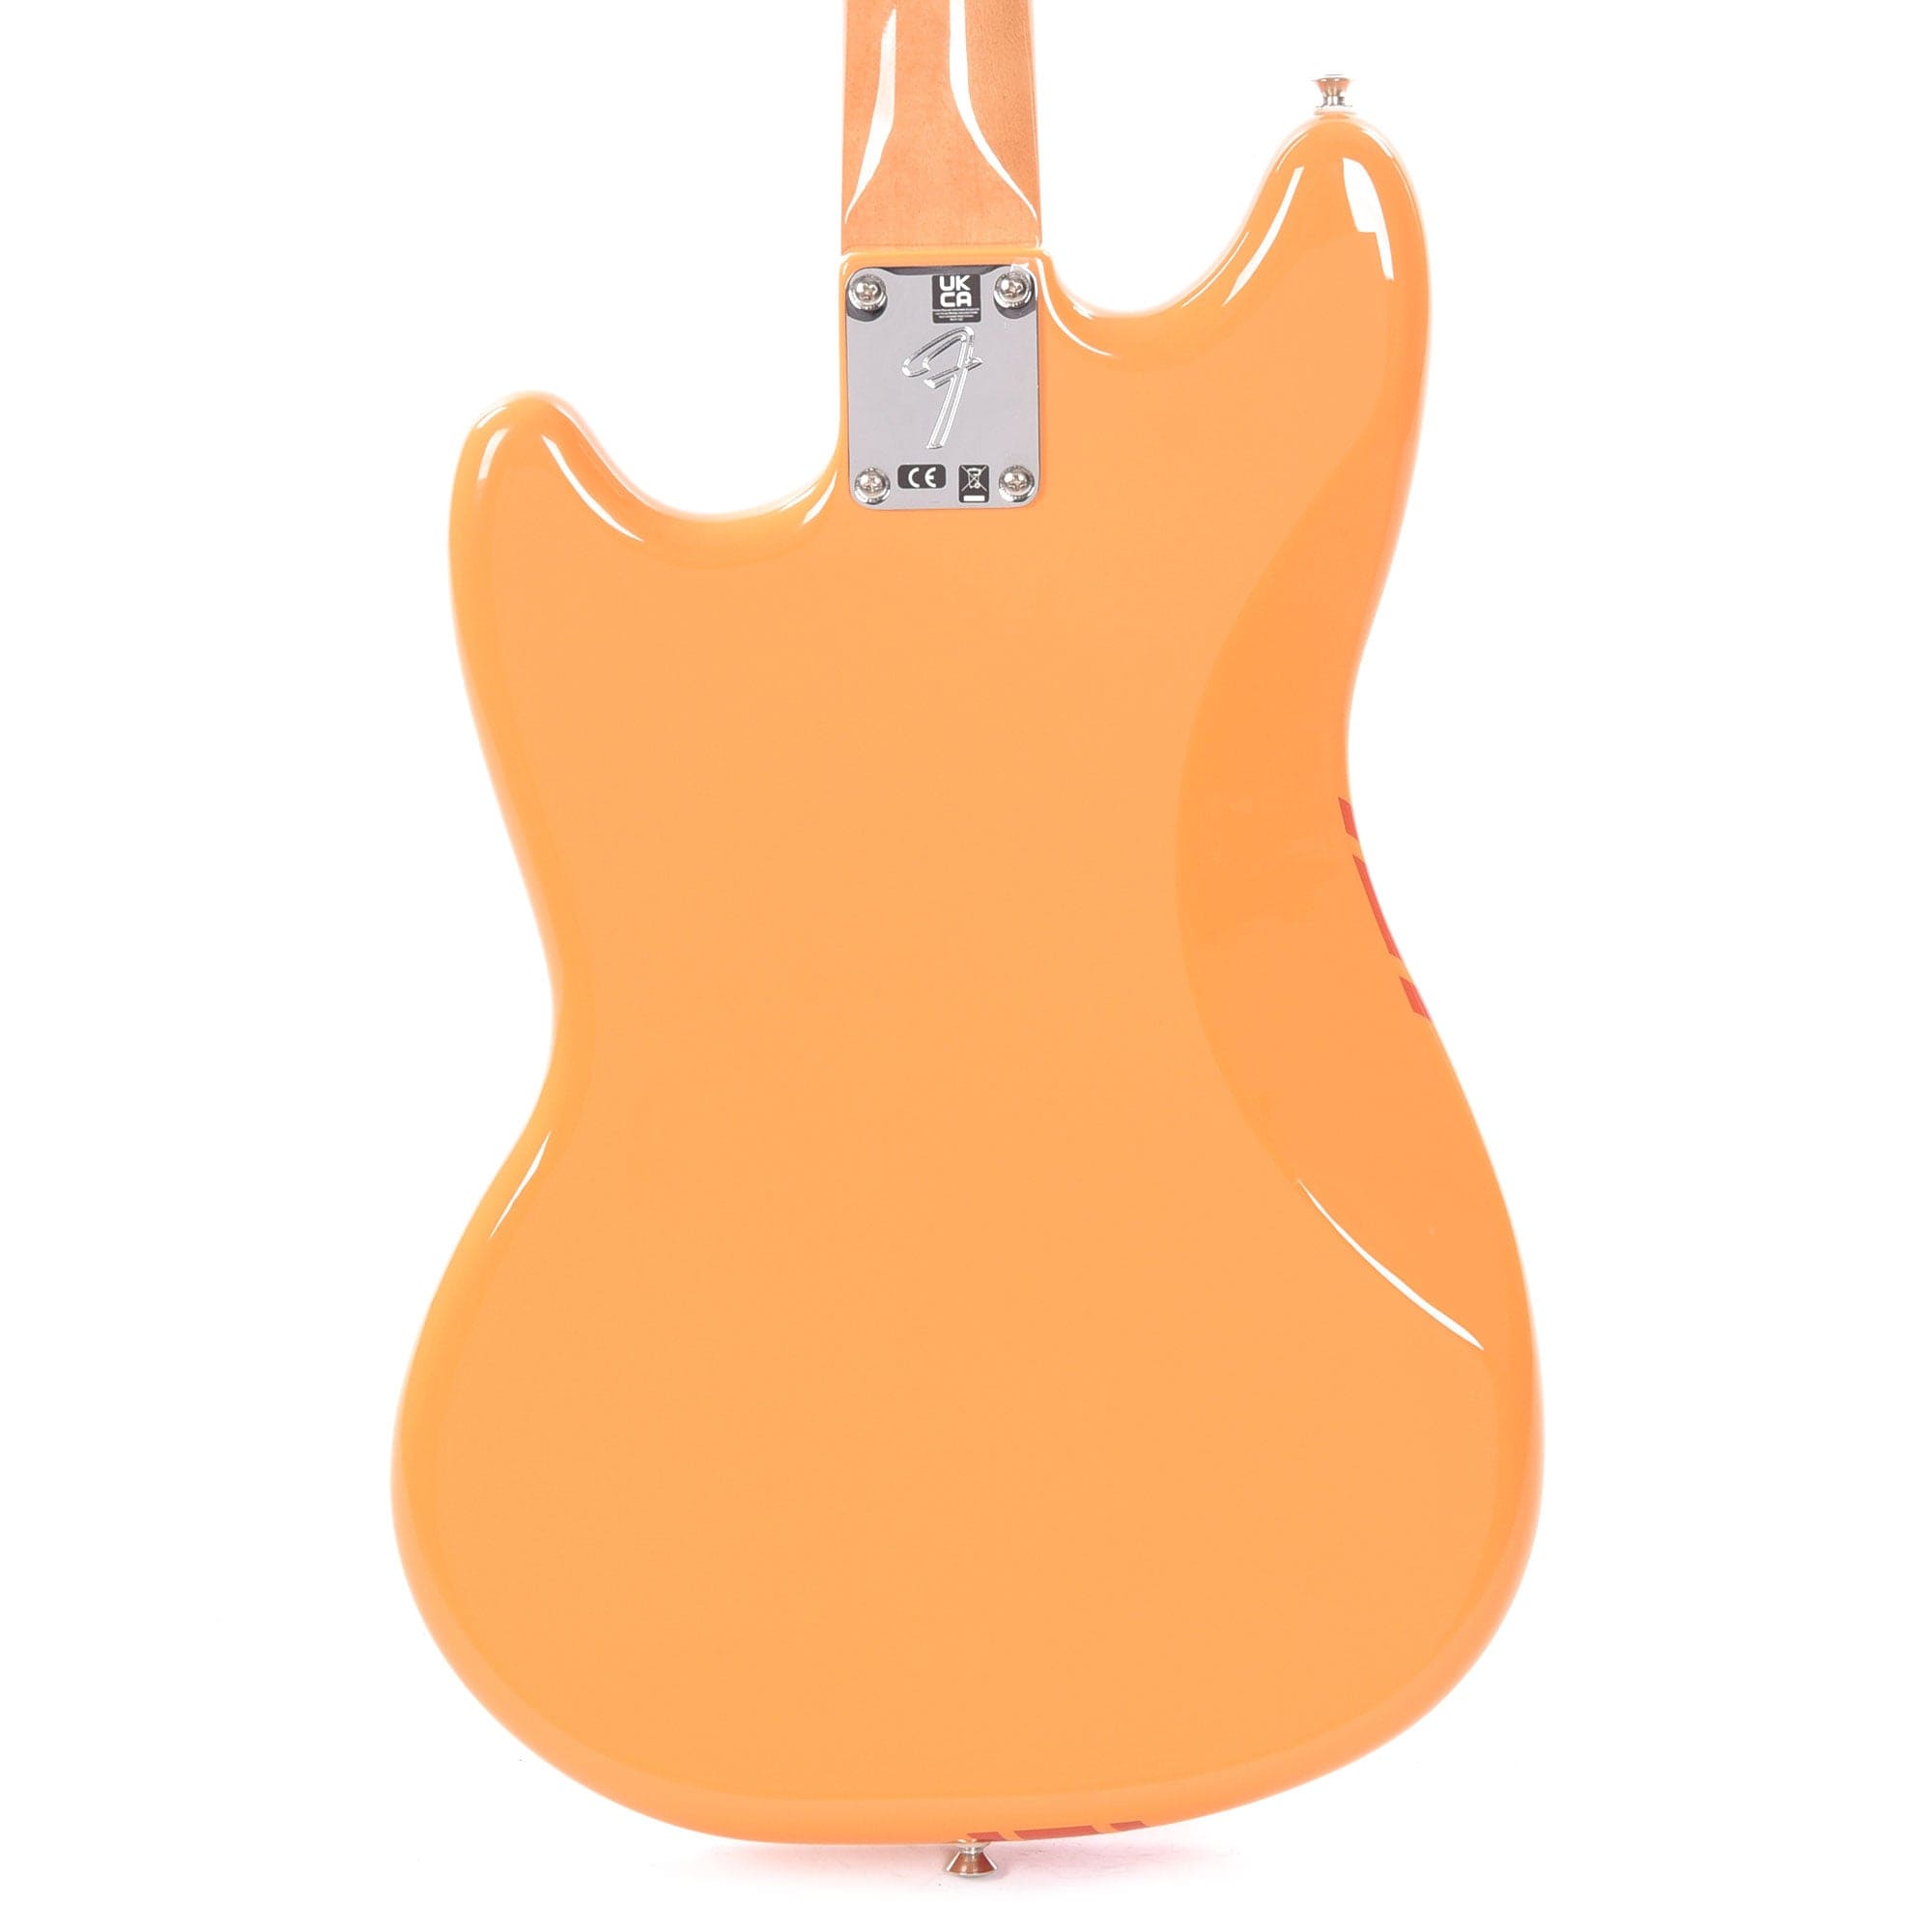 Fender Vintera II 70s Mustang Competition Orange Electric Guitars / Solid Body